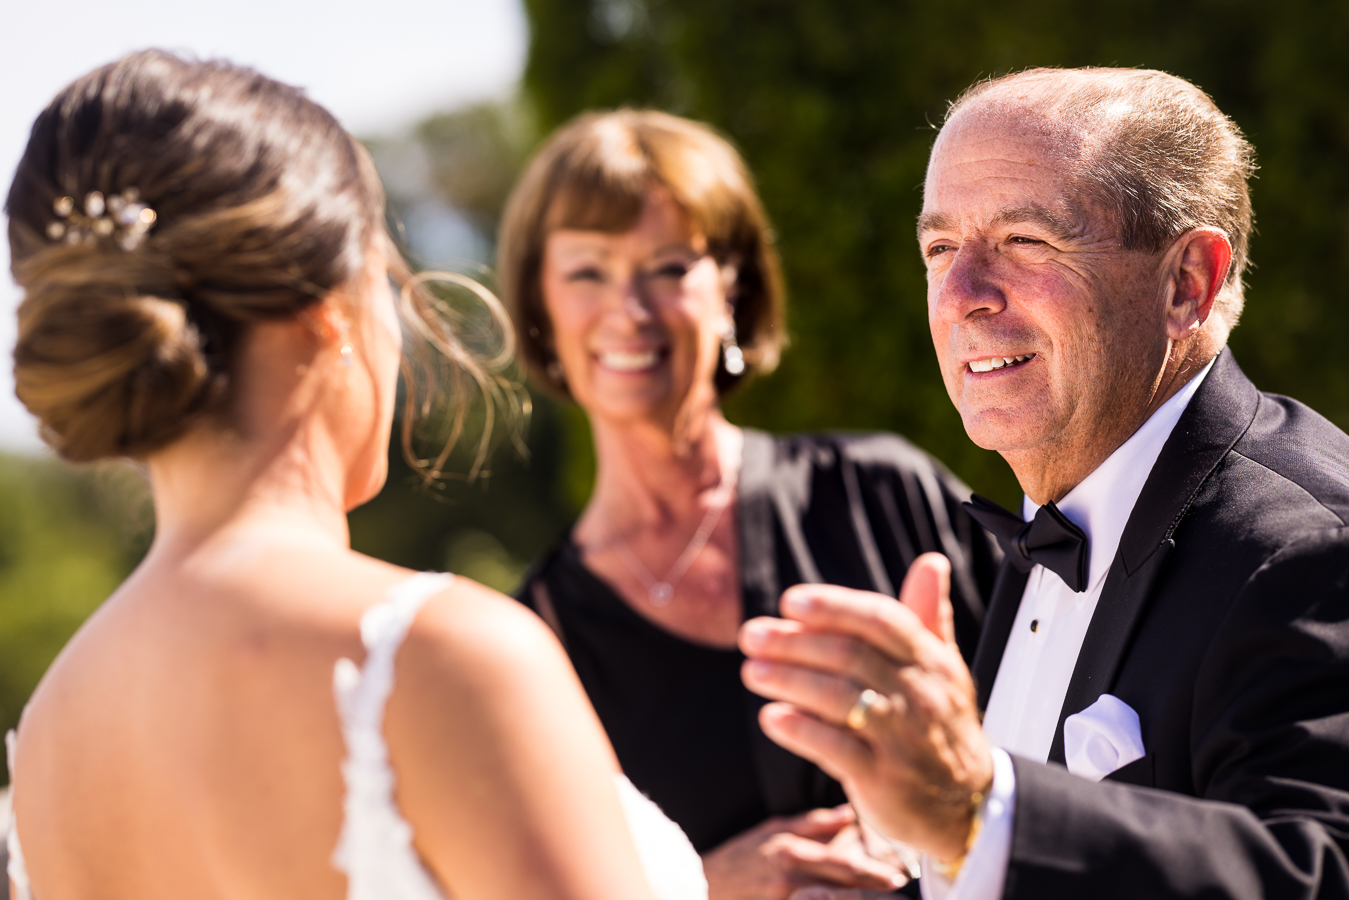 creative nj wedding photographer, rhinehart photography, captures this intimate and sentimental first look outside of the palace at somerset park in NJ as the father and mother of the bride smile at her in awe after seeing her for the first time as a bride 